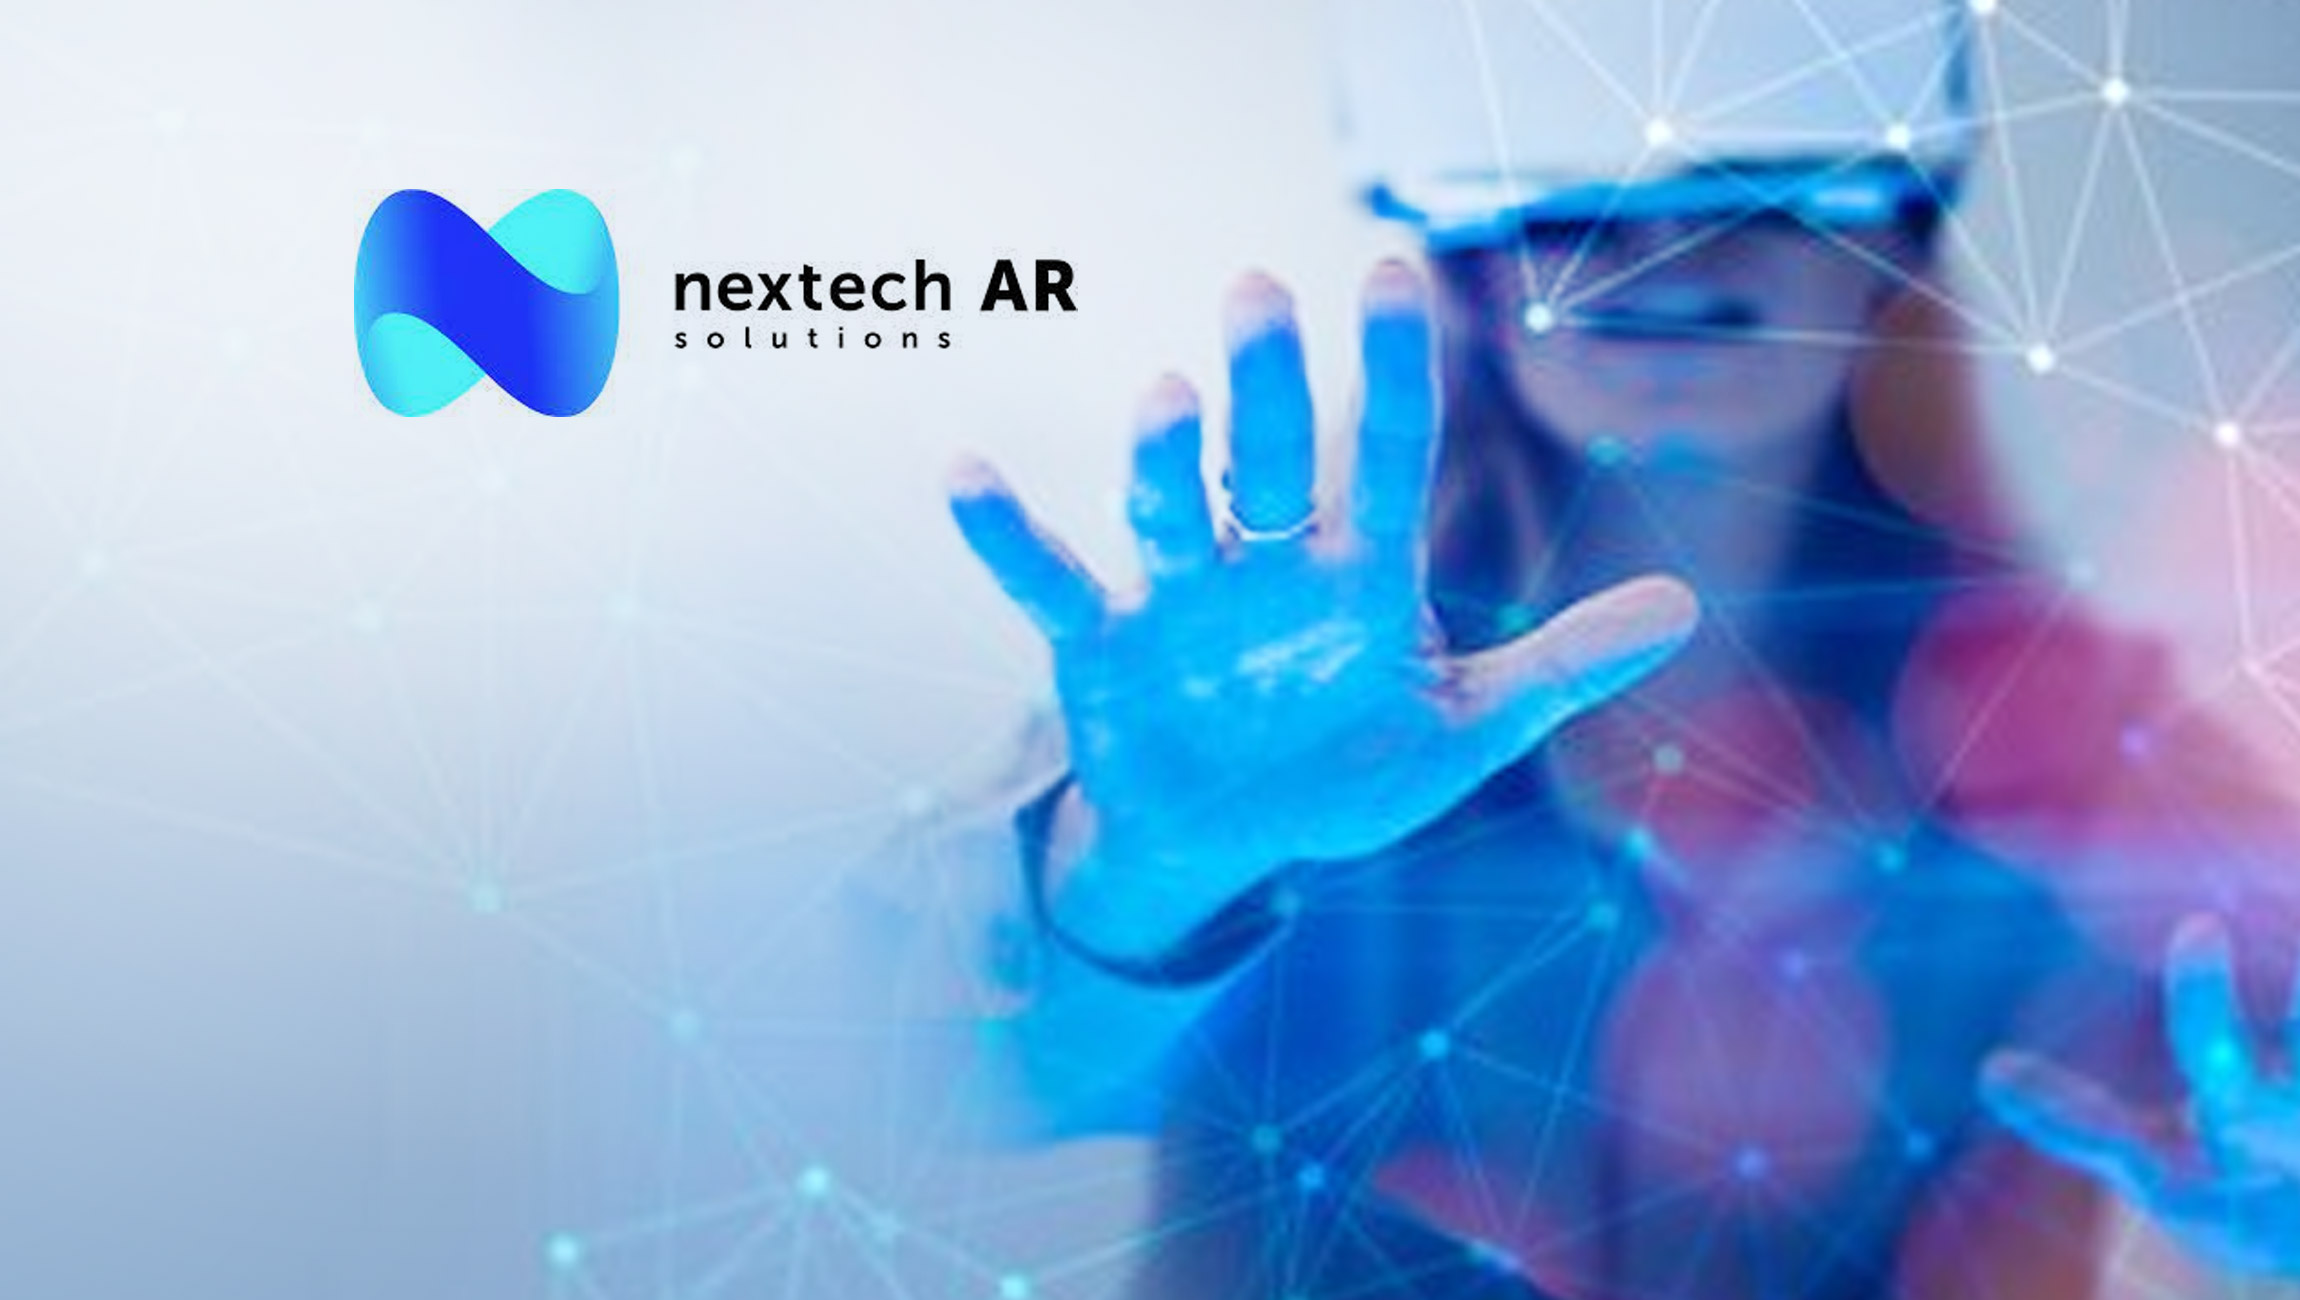 Nextech’s Breakthrough Generative AI Positions Company for Breakout Revenue Growth in 2023 1